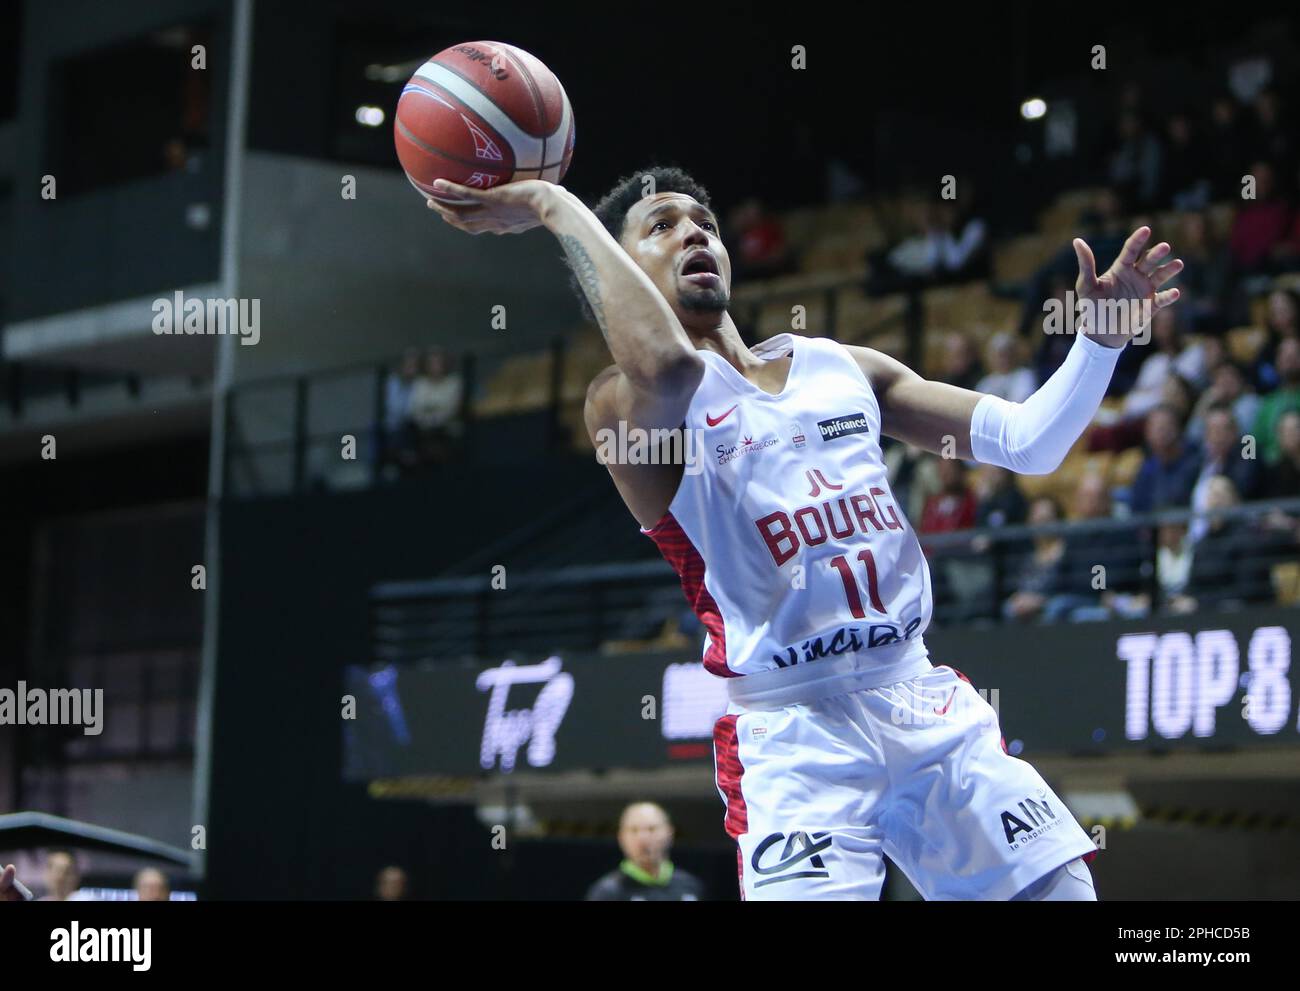 Jordan FLOYD of JL BOURG-EN-BRESSE during the French cup, Top 8,  quarter-finals Basketball match between JL Bourg-en-Bresse and SIG  Strasbourg on March 18, 2023 at Arena Loire in Trelaze, France - Photo